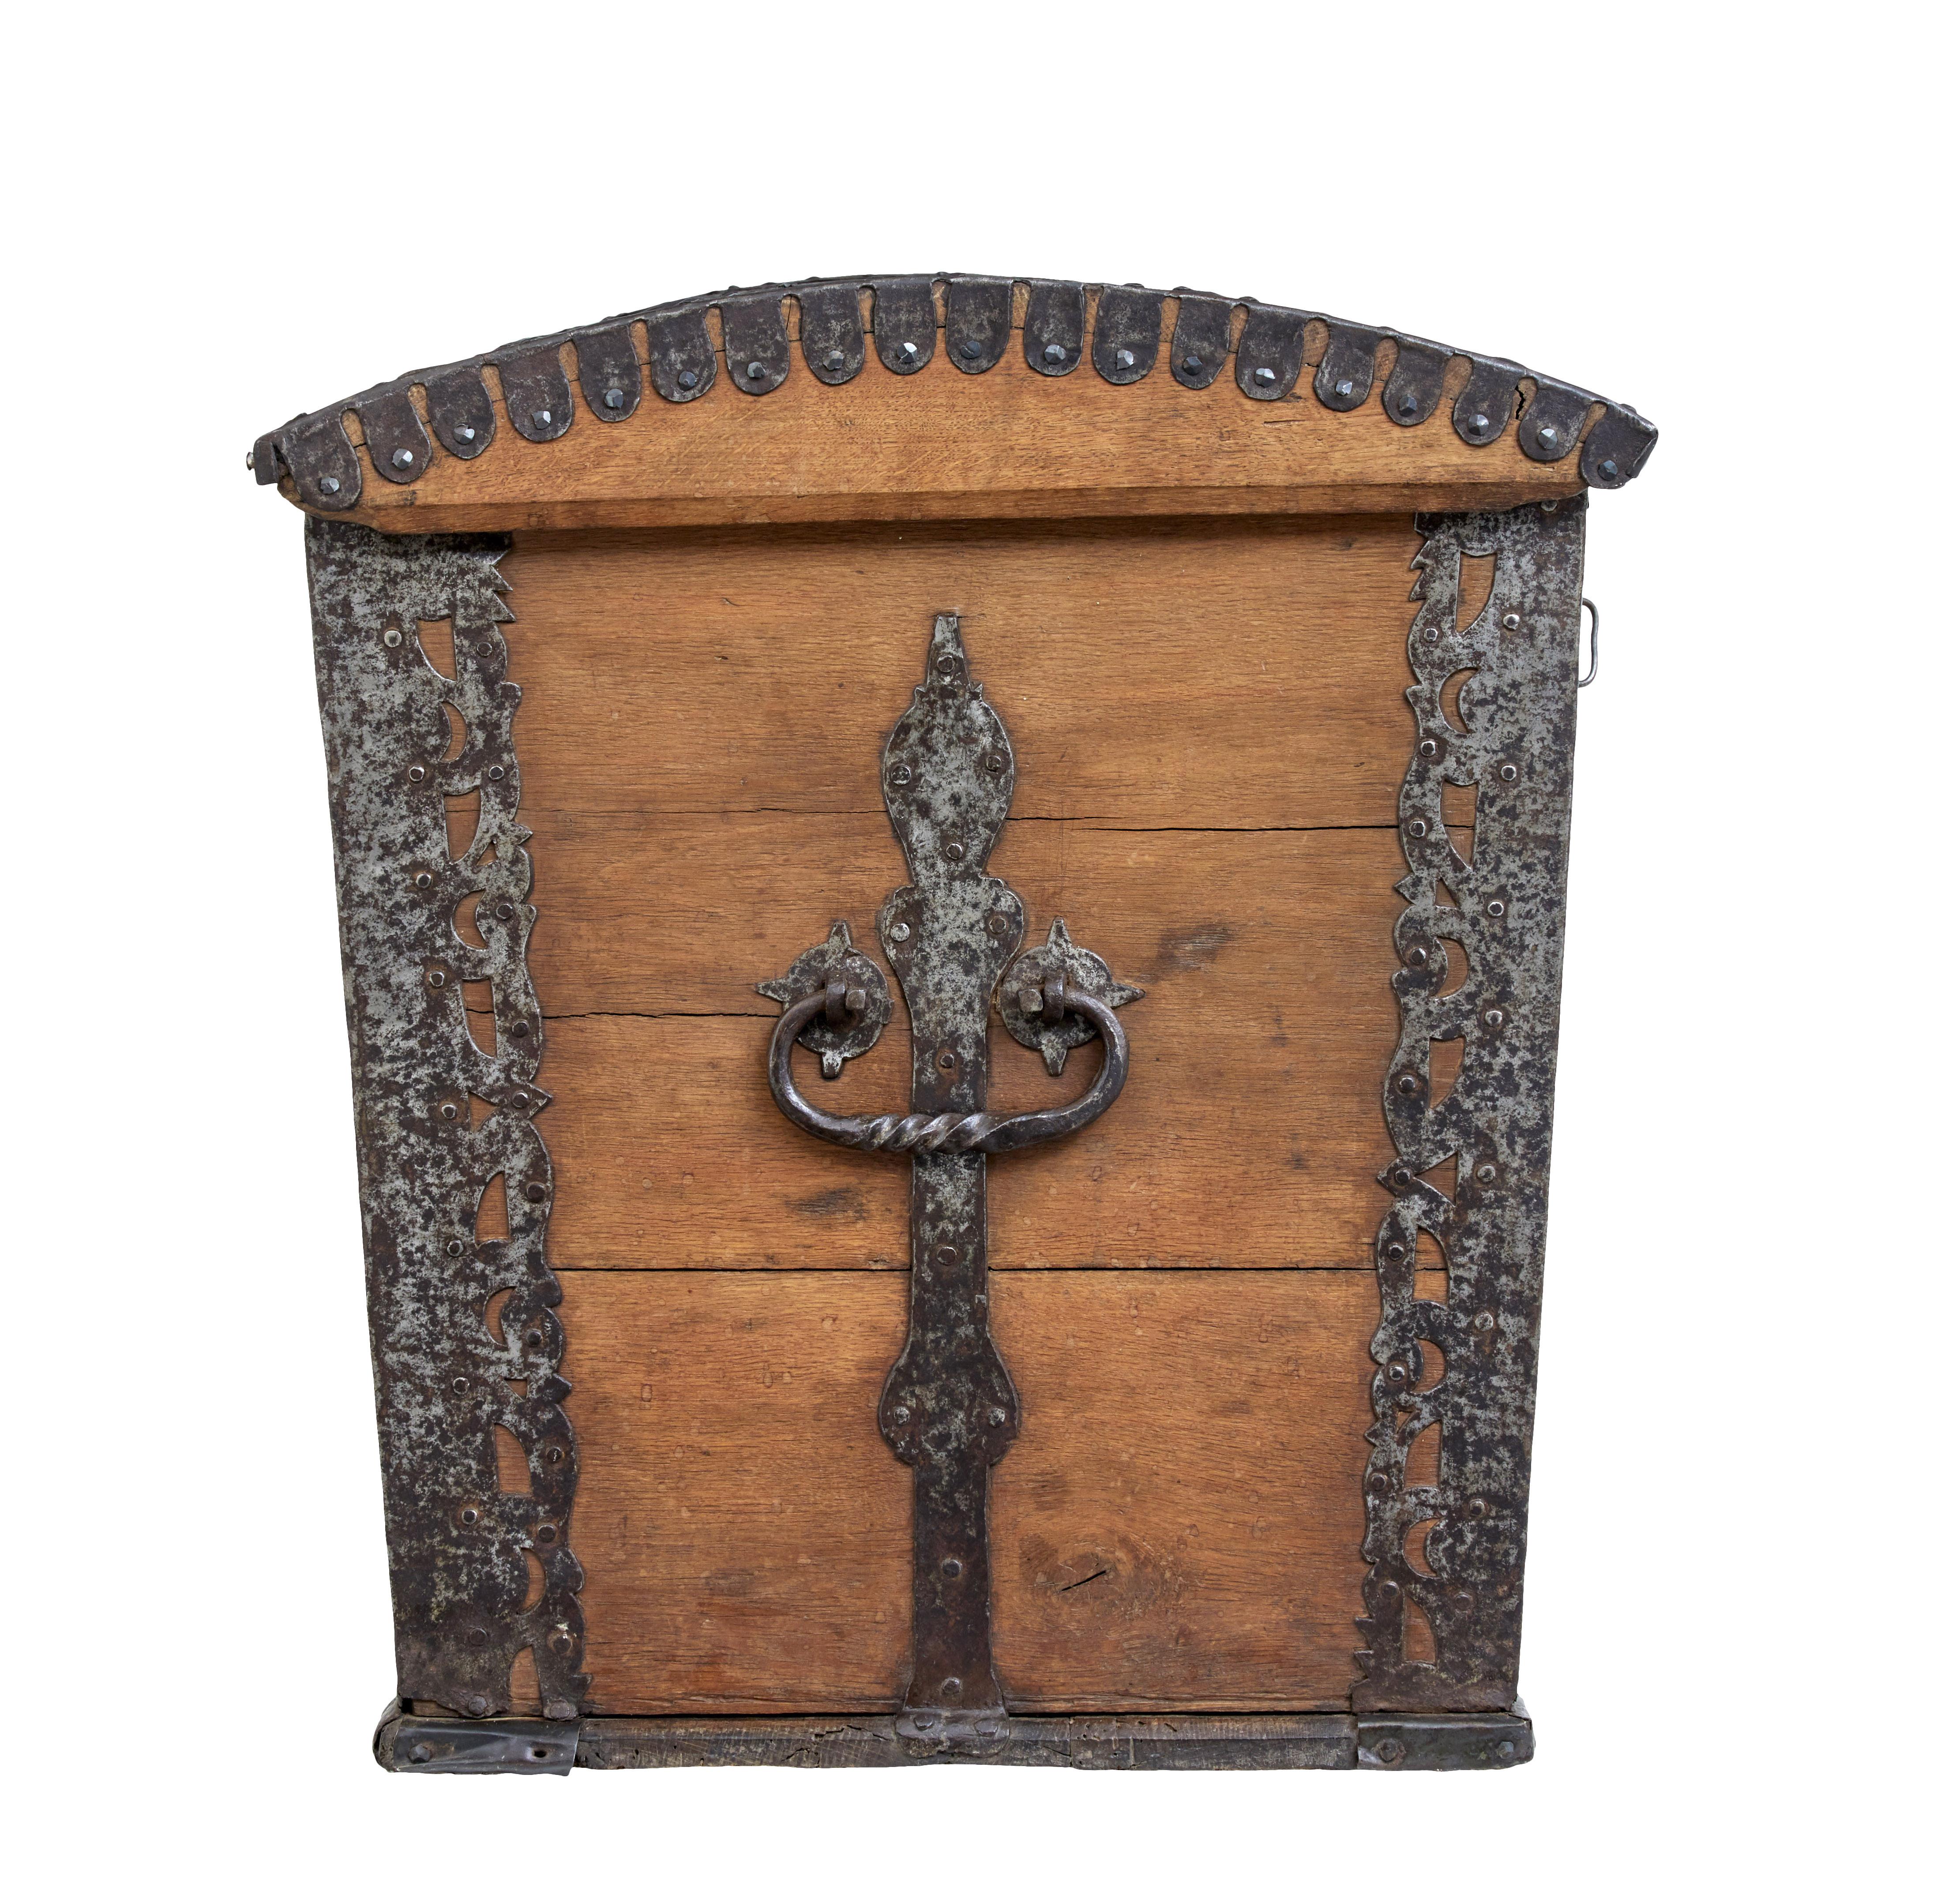 Baroque Revival Mid 18th Century oak and iron dome top trunk